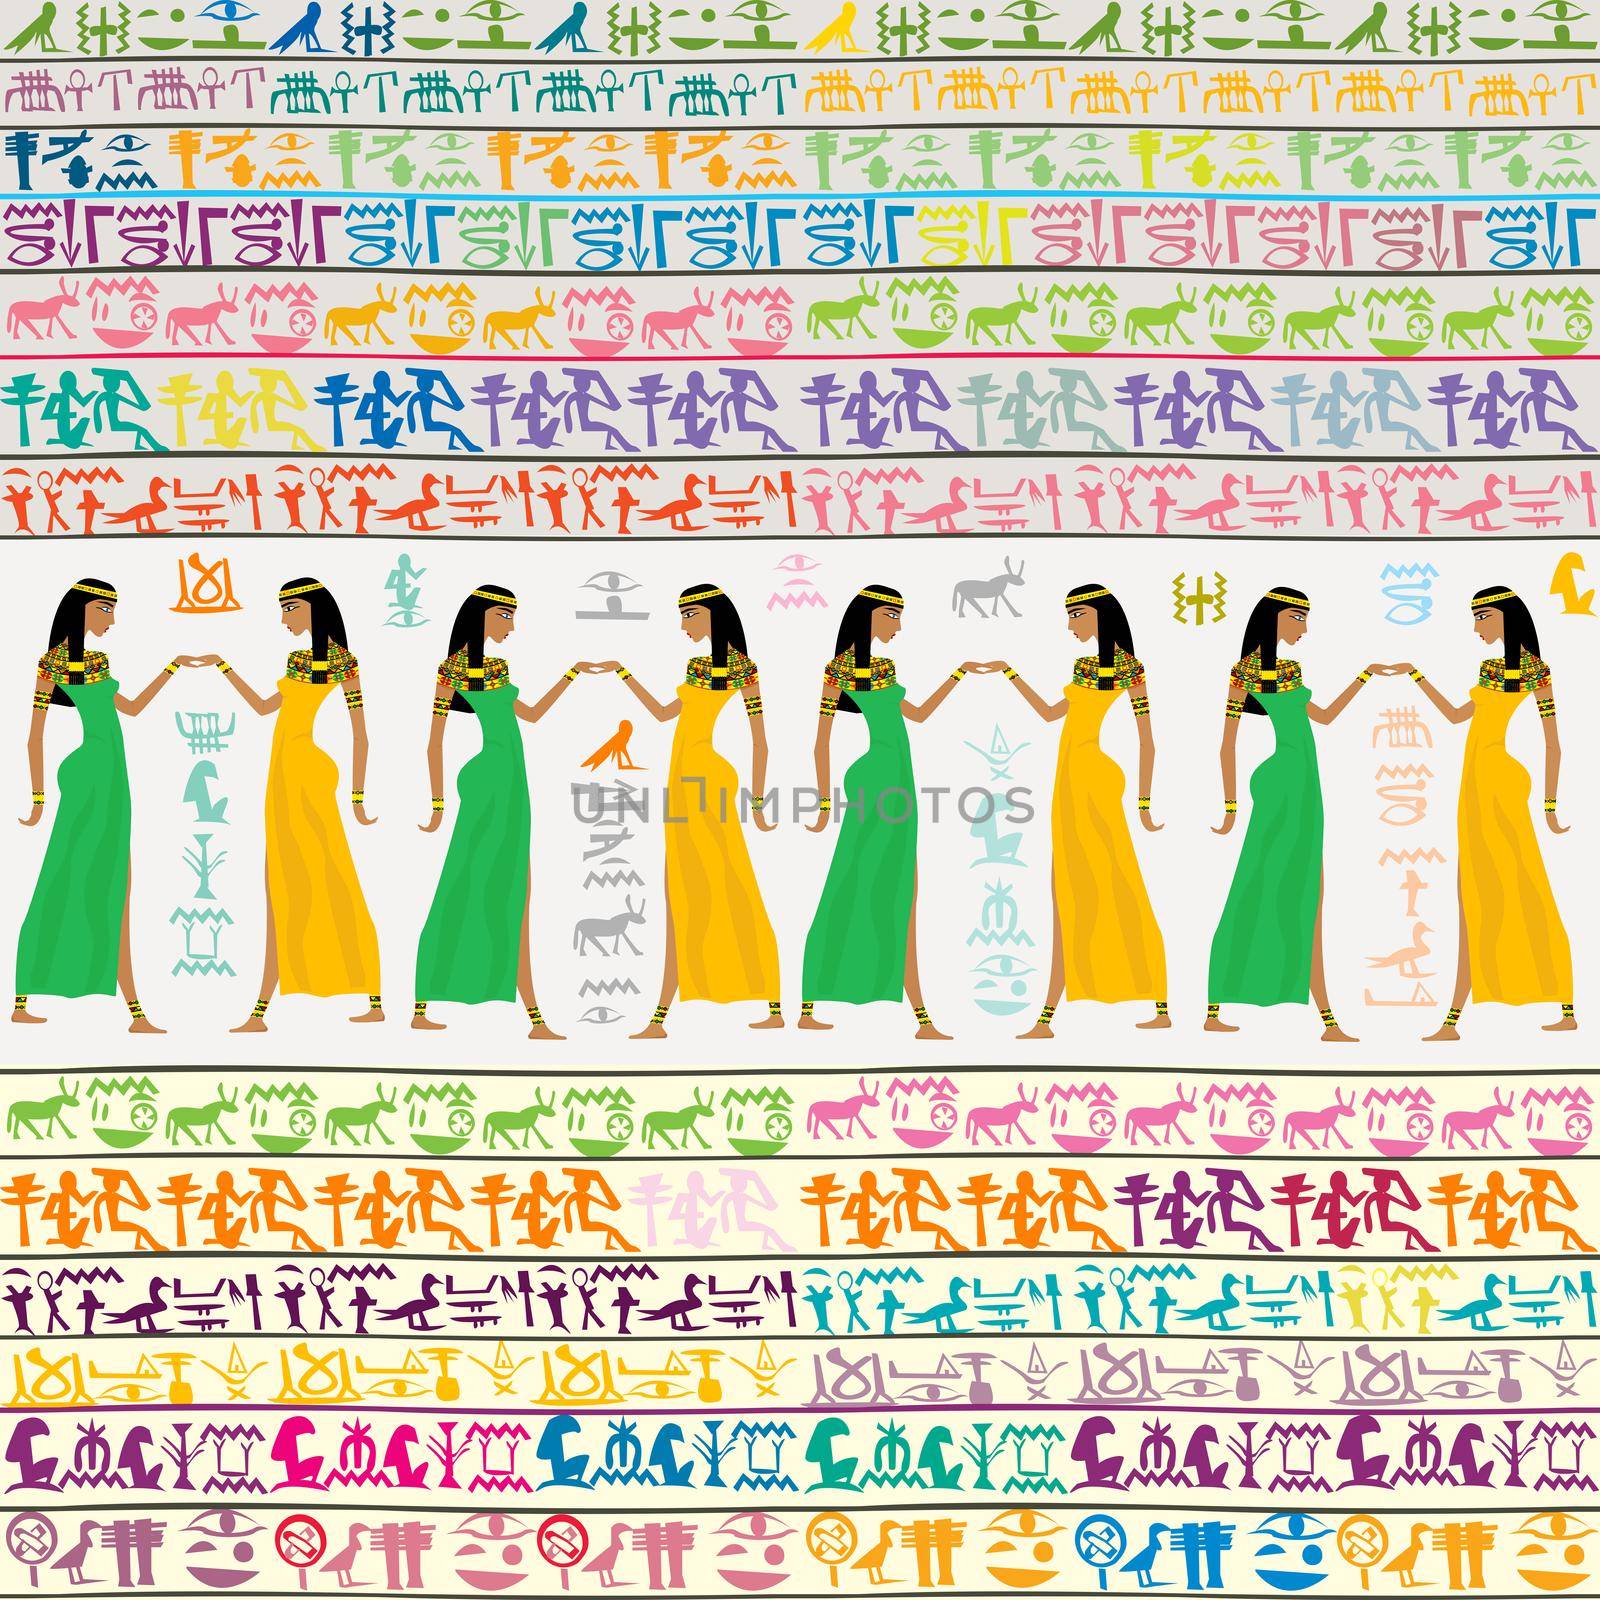 Colorful Egyptian pattern with egyptian women and hieroglyphs by hibrida13